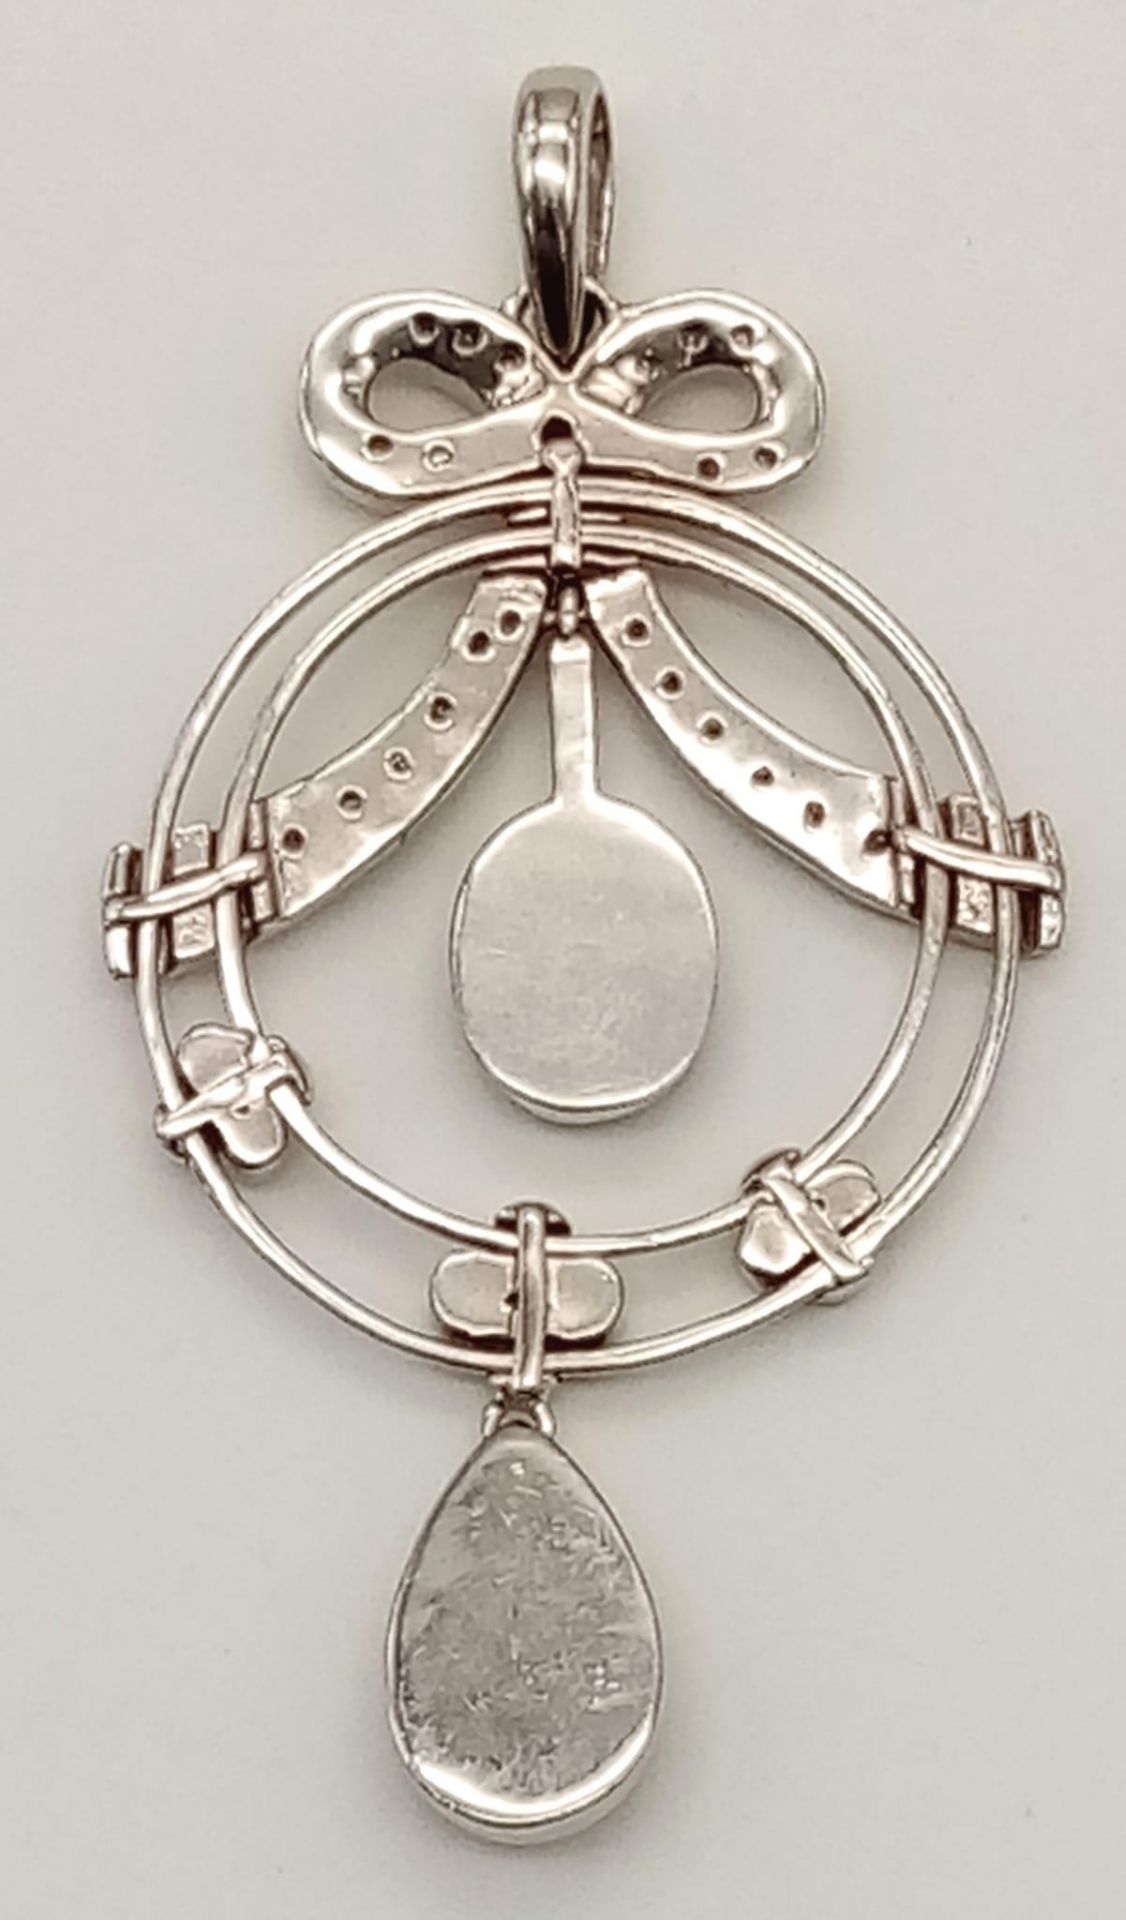 A VERY ATTRACTIVE STERLING SILVER STONE SET FANCY DROP PENDANT, BOW TIE DESIGNED WITH 2 LARGE - Image 2 of 3